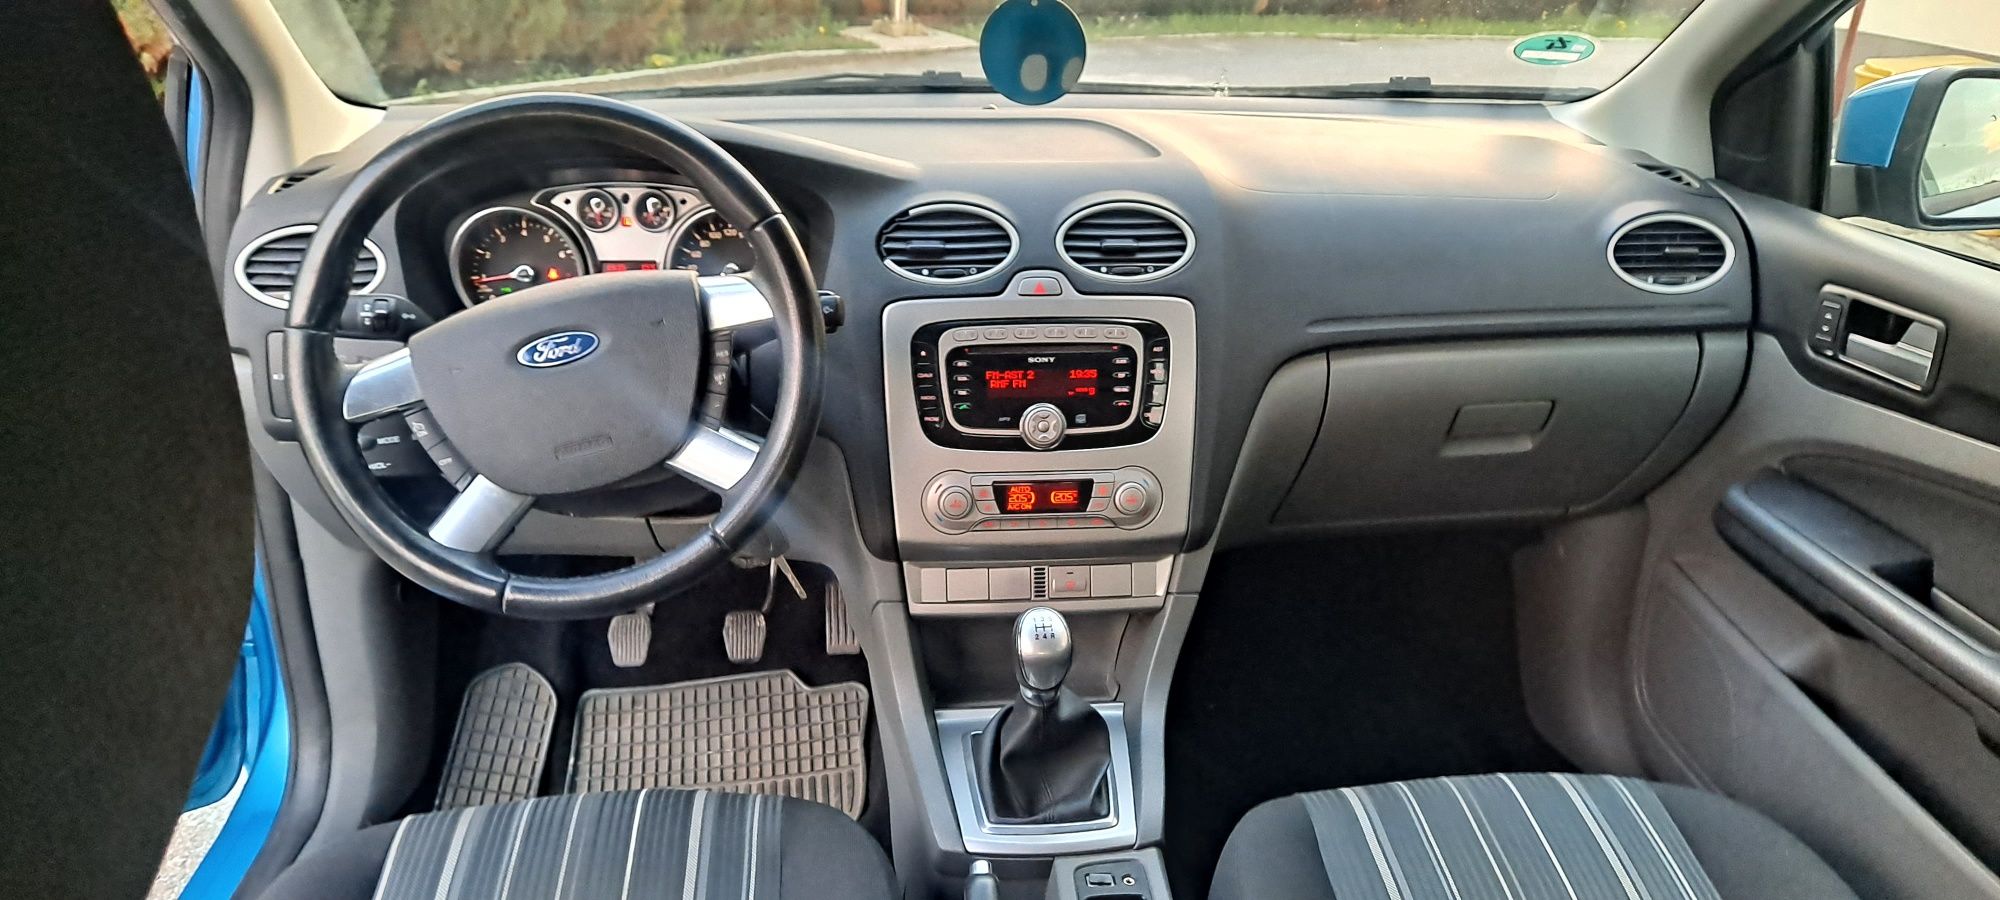 Ford Focus mk2 lift 1.6 benzyna